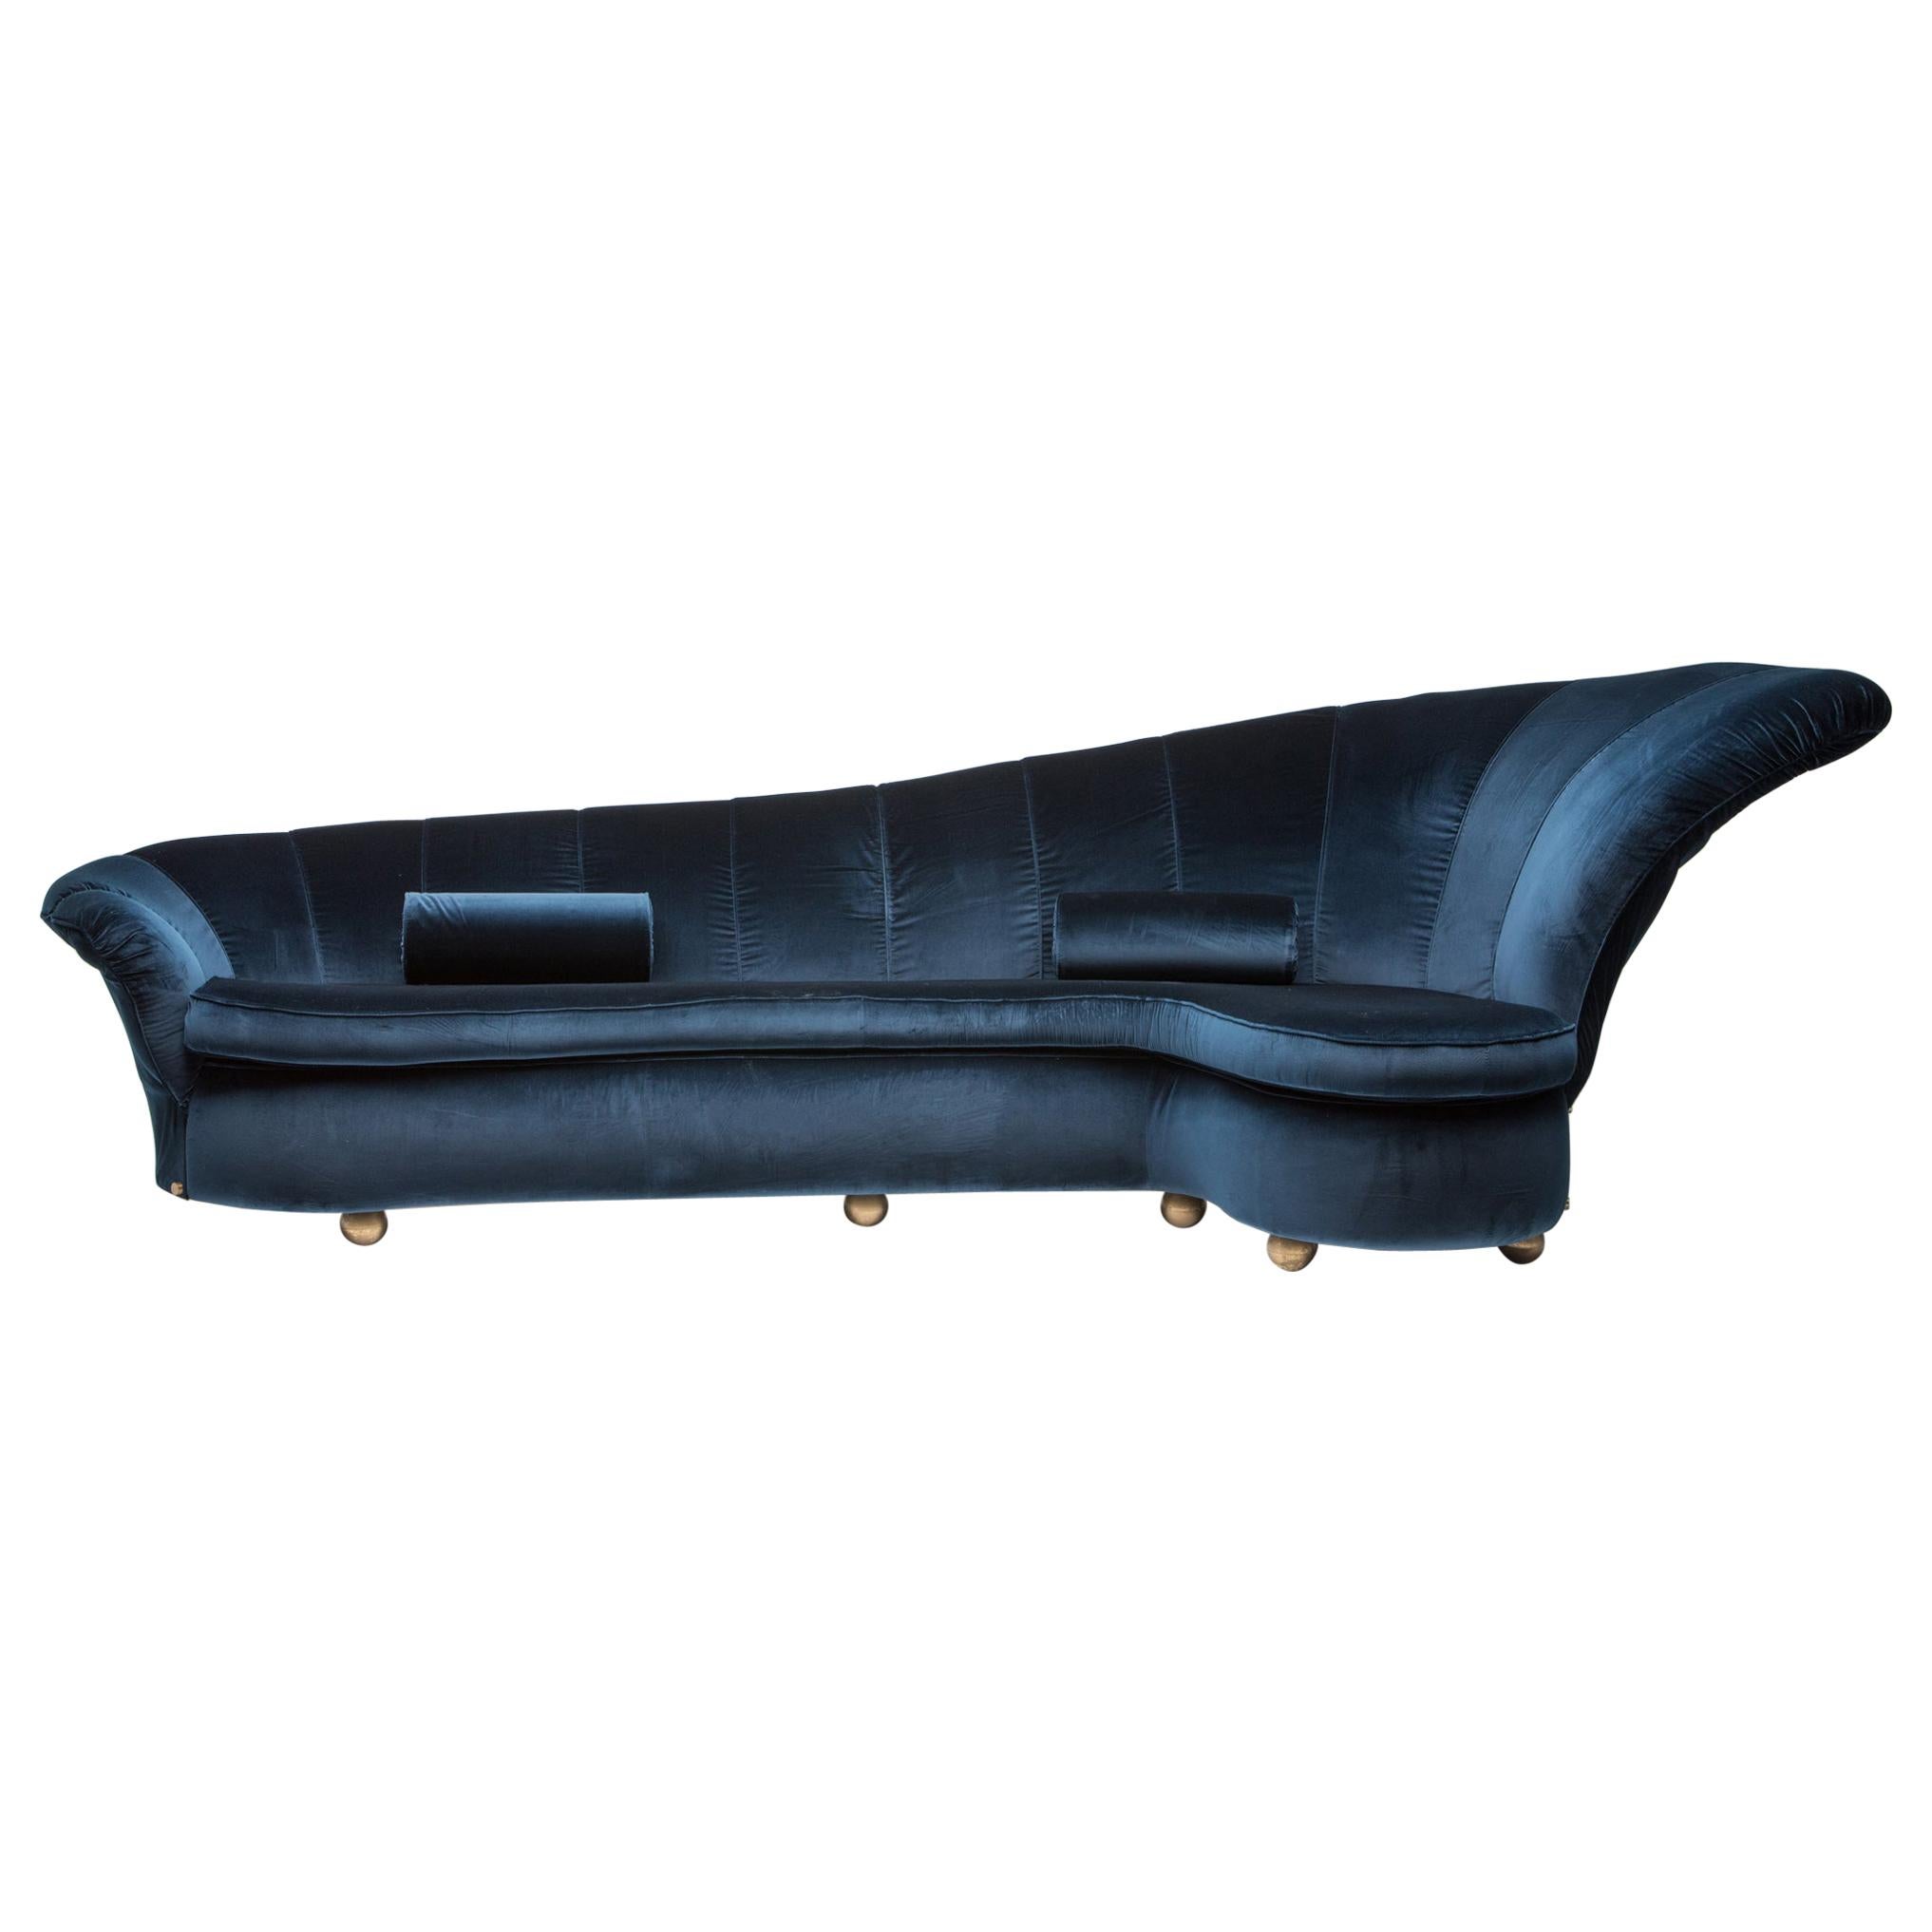 Italian glam couch, newly reupholstered blue velvet, round brass feet, attributed to Marzio Cecchi, circa 1970's, Italy

This piece has been reupholstered in a marvelous chic dark blue velvet which works really well with the round brass feet.
Marzio